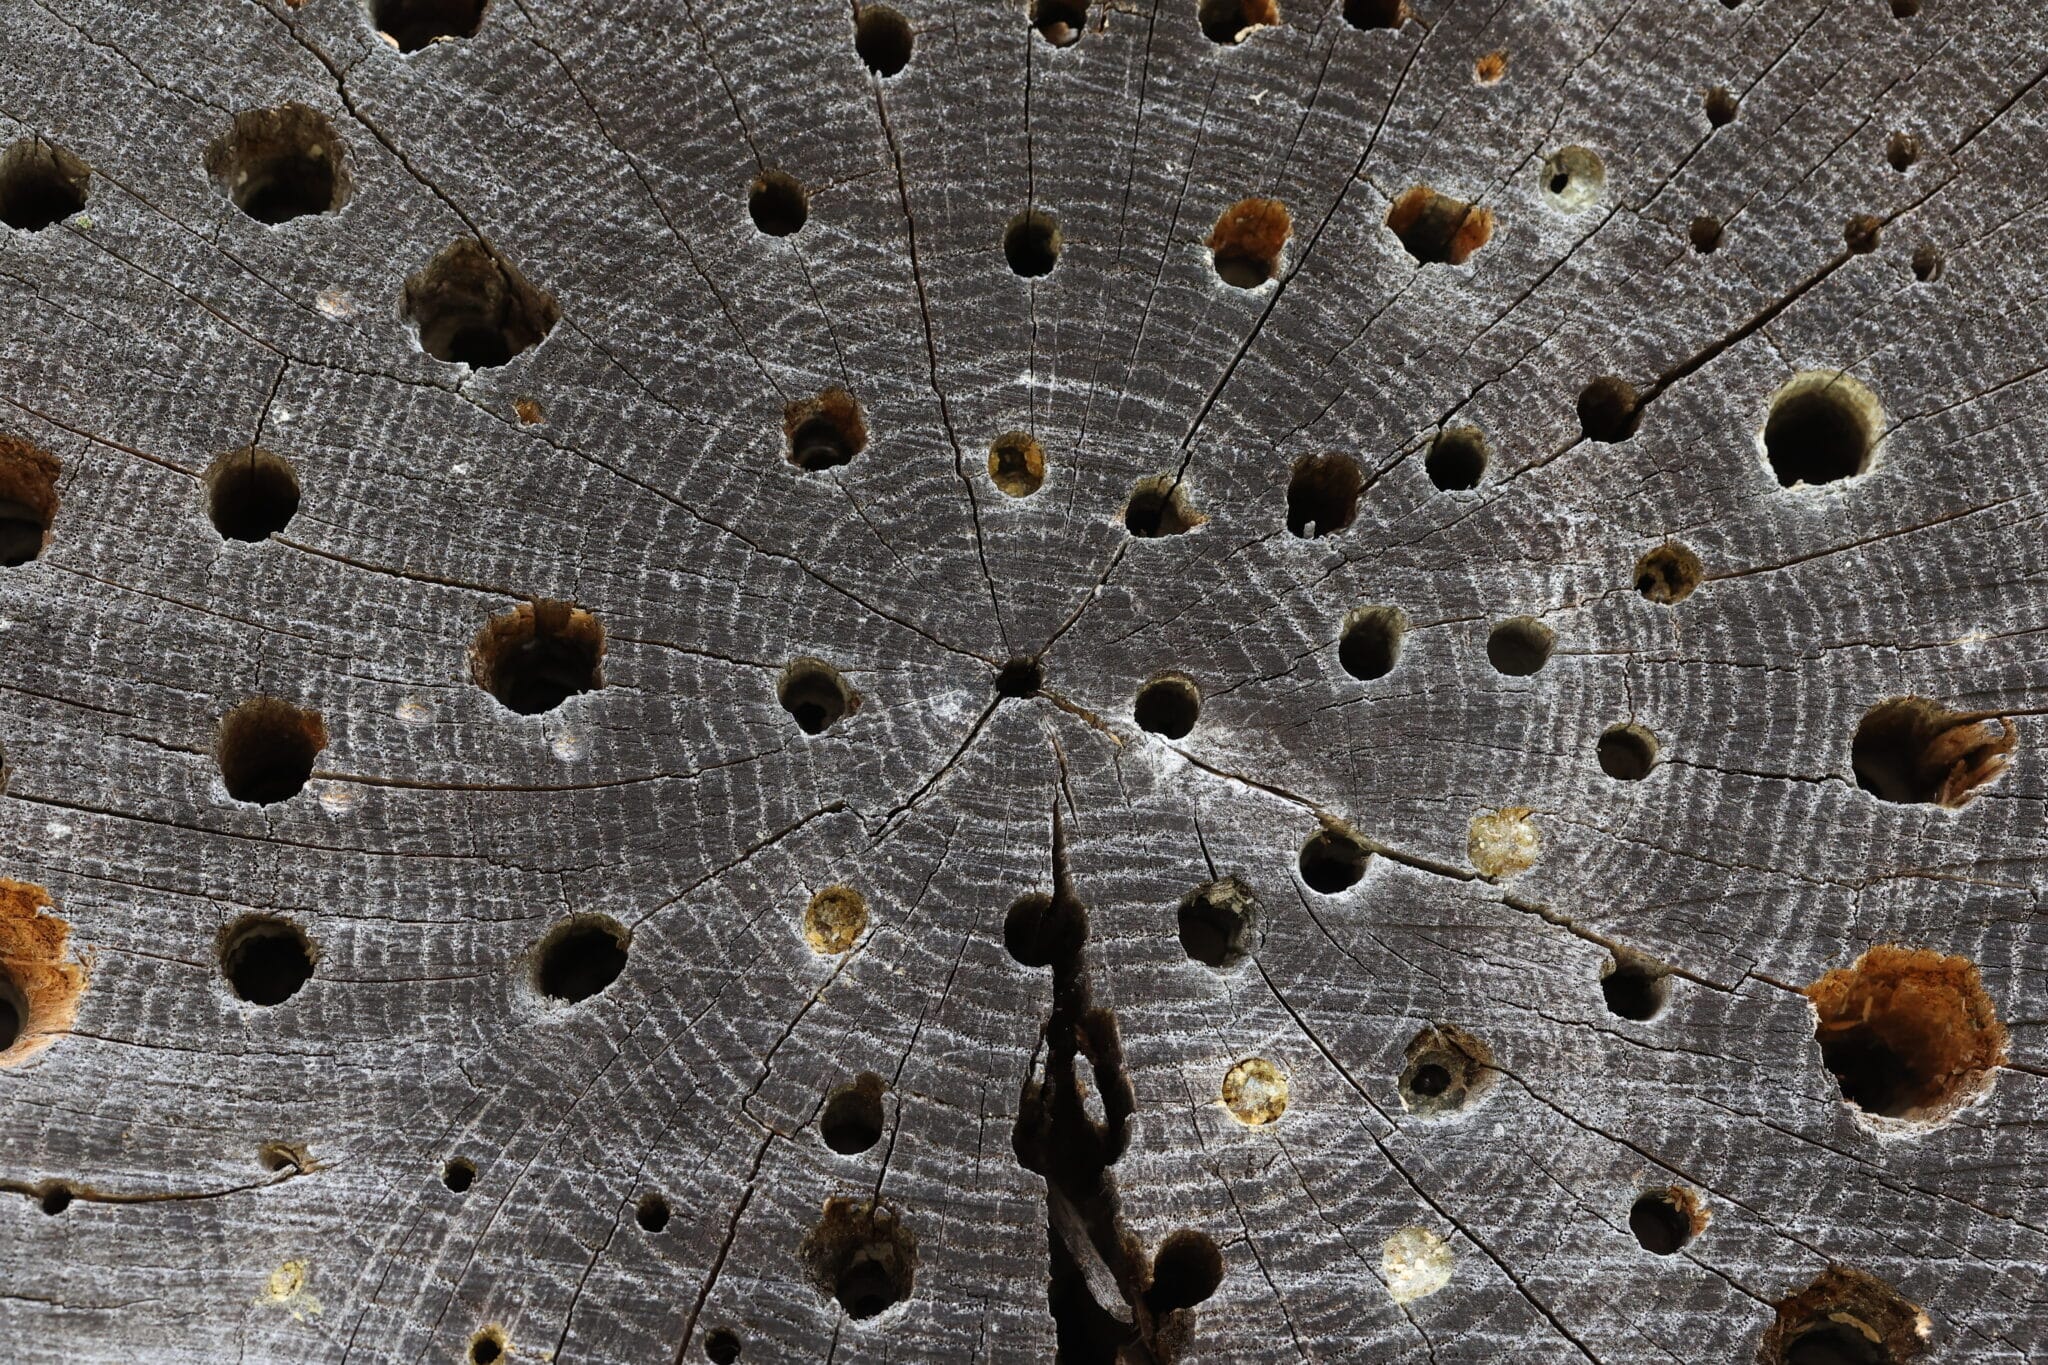 Holes in a stump created by Carpenter Bees